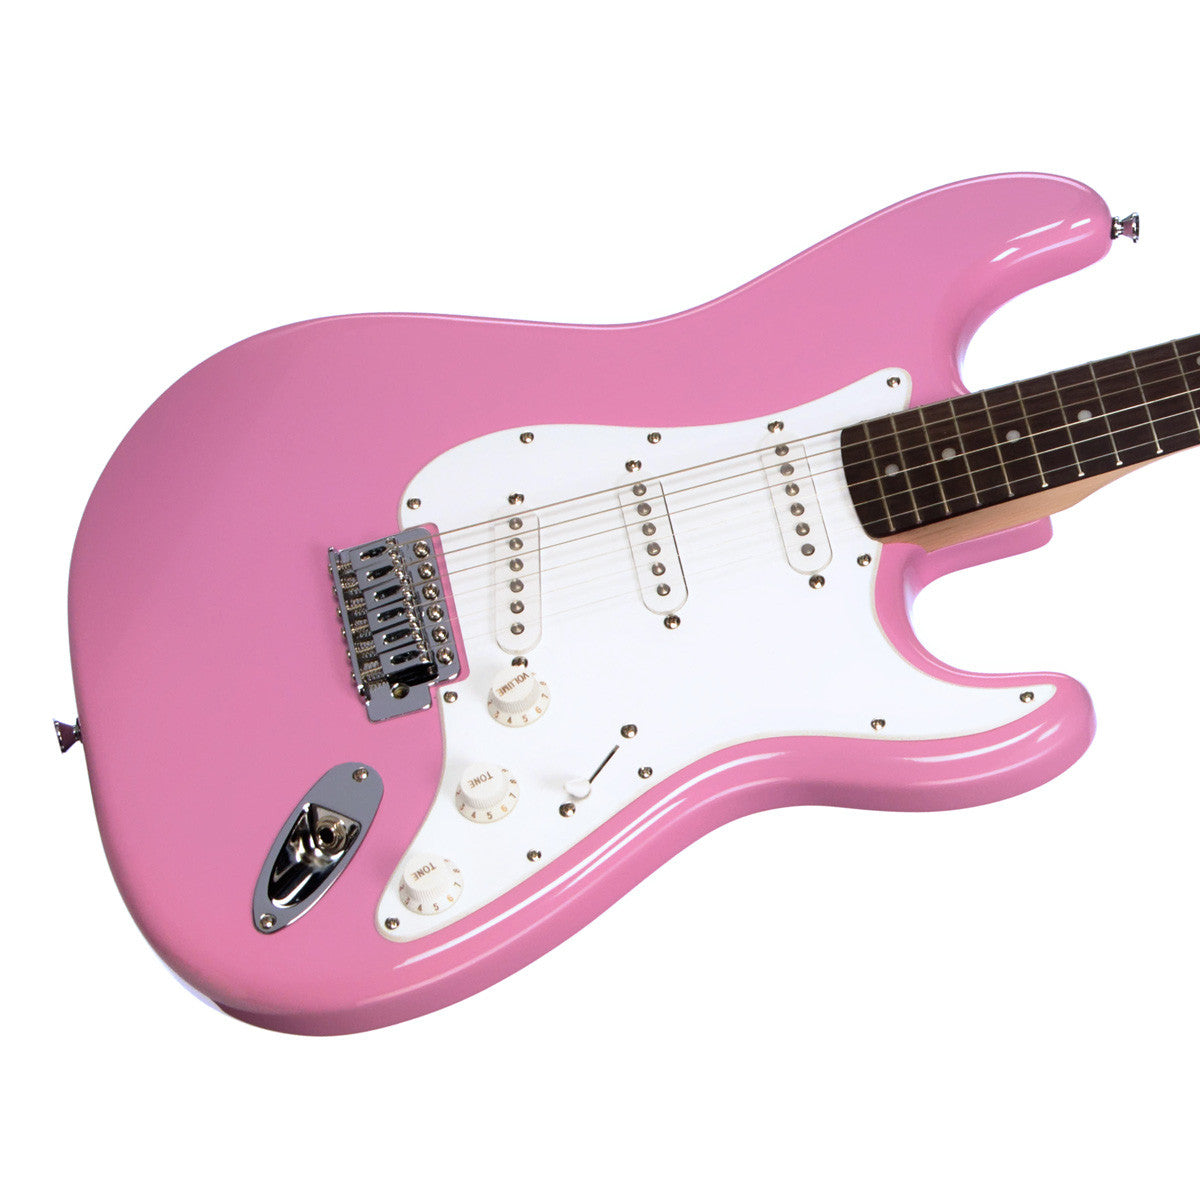 Squier Bullet Strat with Tremolo   Make'n Music